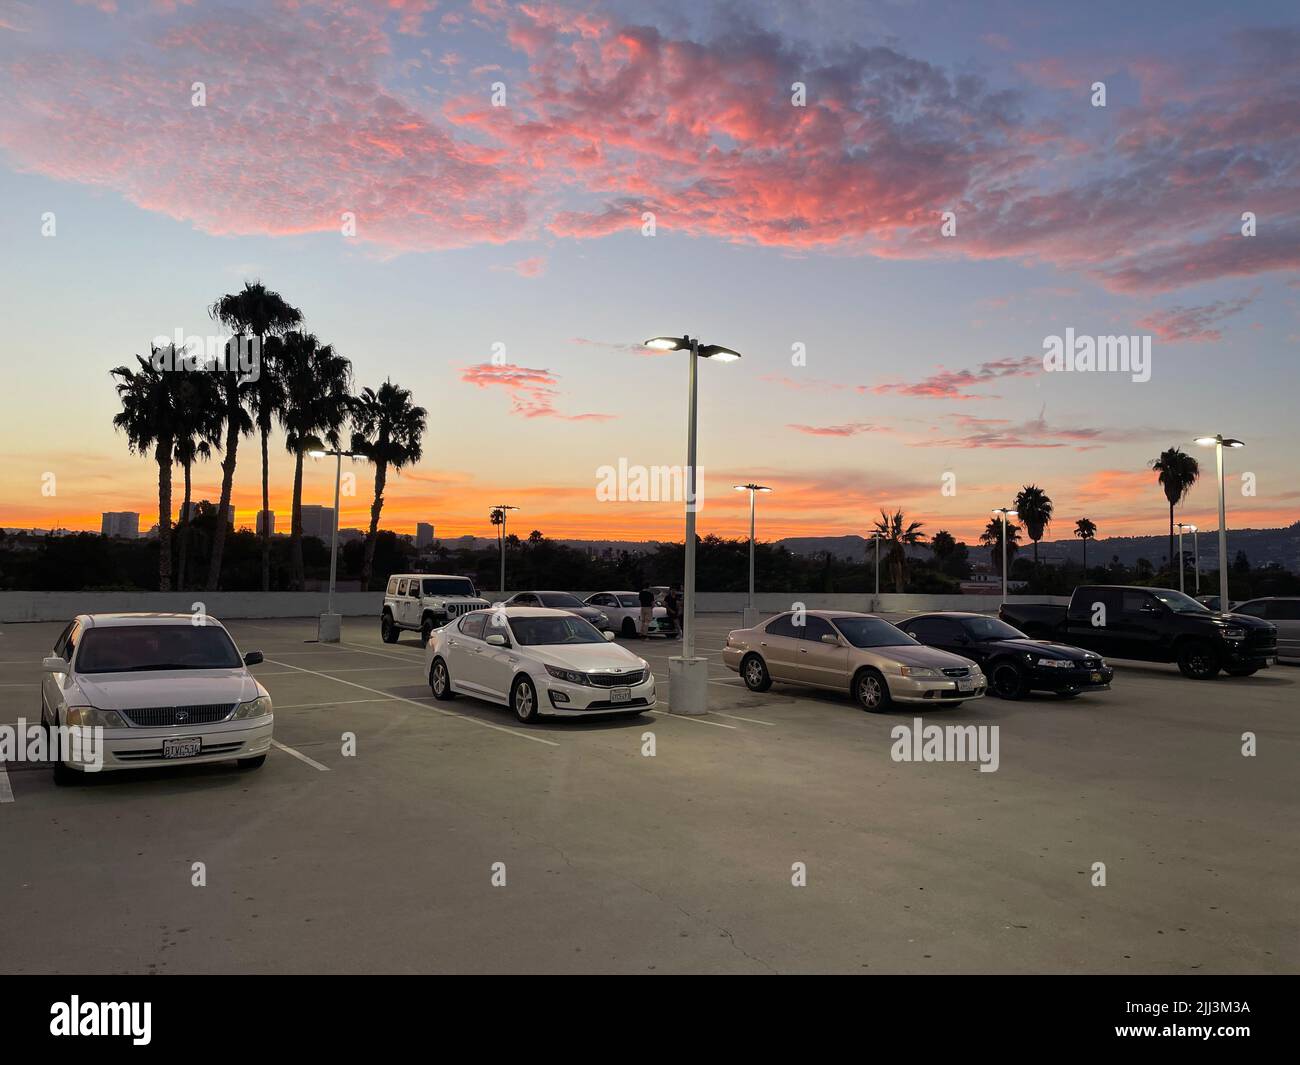 Rooftop parking lot with colorful sunset in Los Angeles, CA Stock Photo